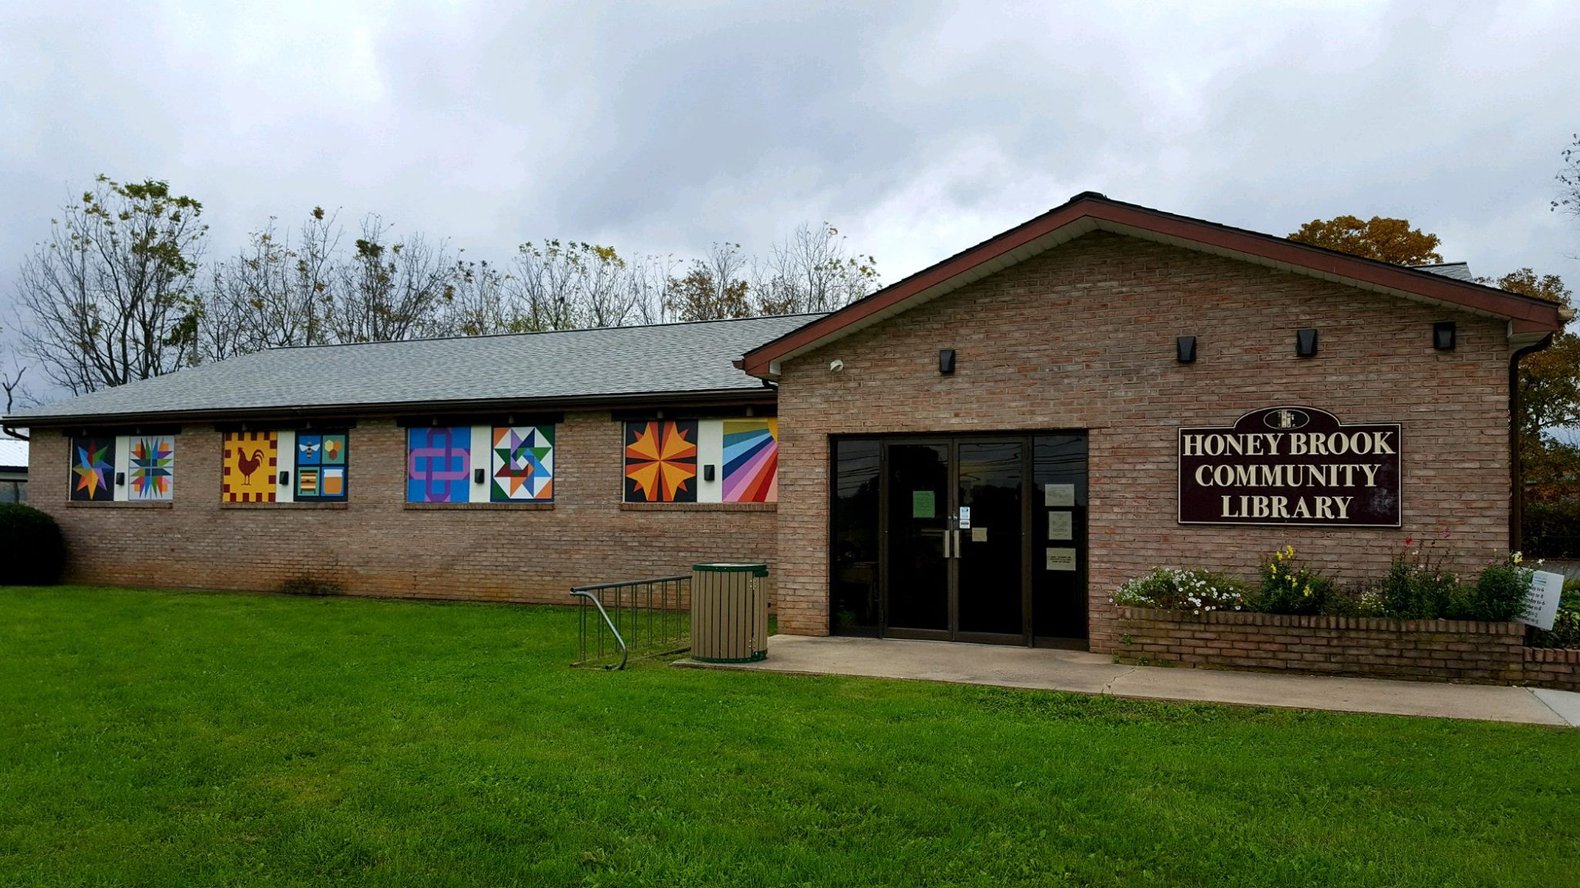 The Honey Brook Community Library is December 2019 s Charity of the Month